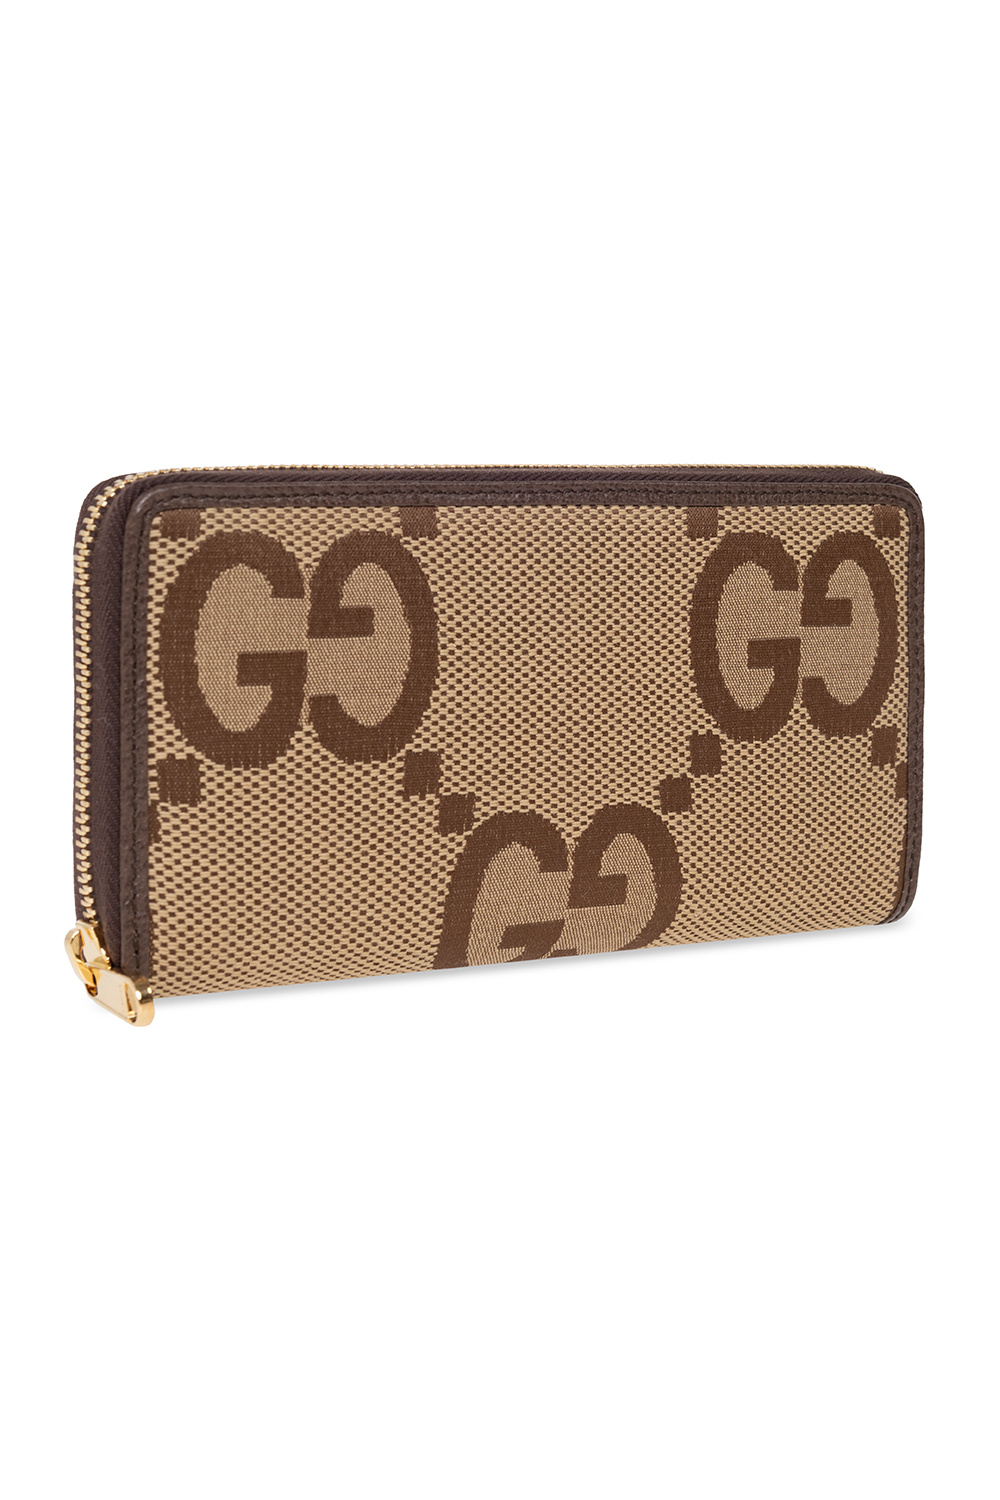 gucci GIRLS Wallet with logo